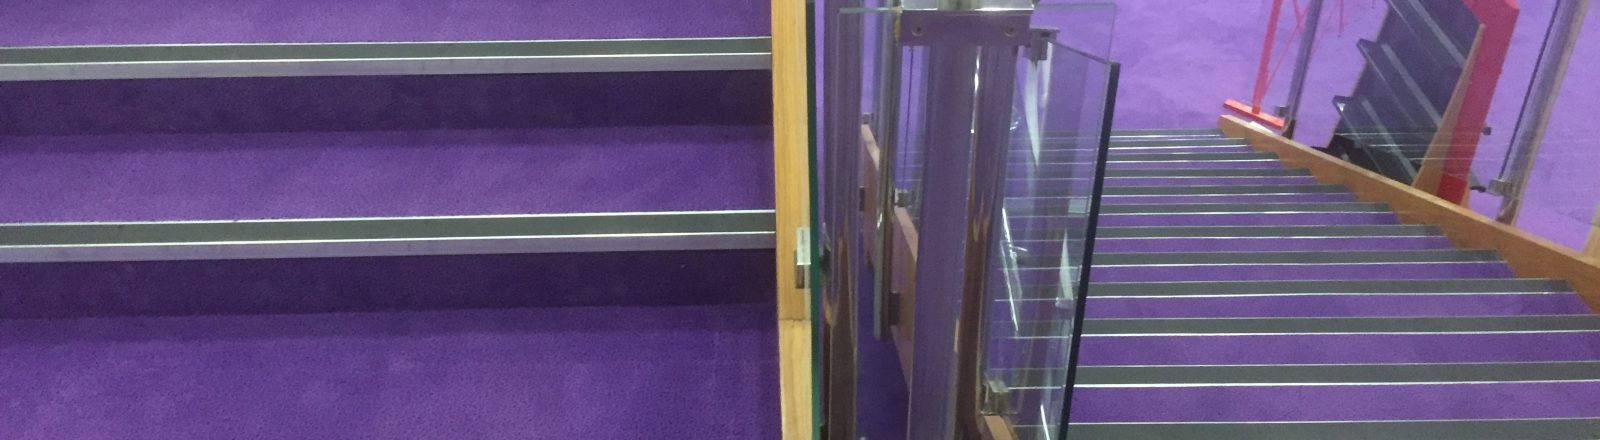 Solihull Library Stairway with Purple carpet